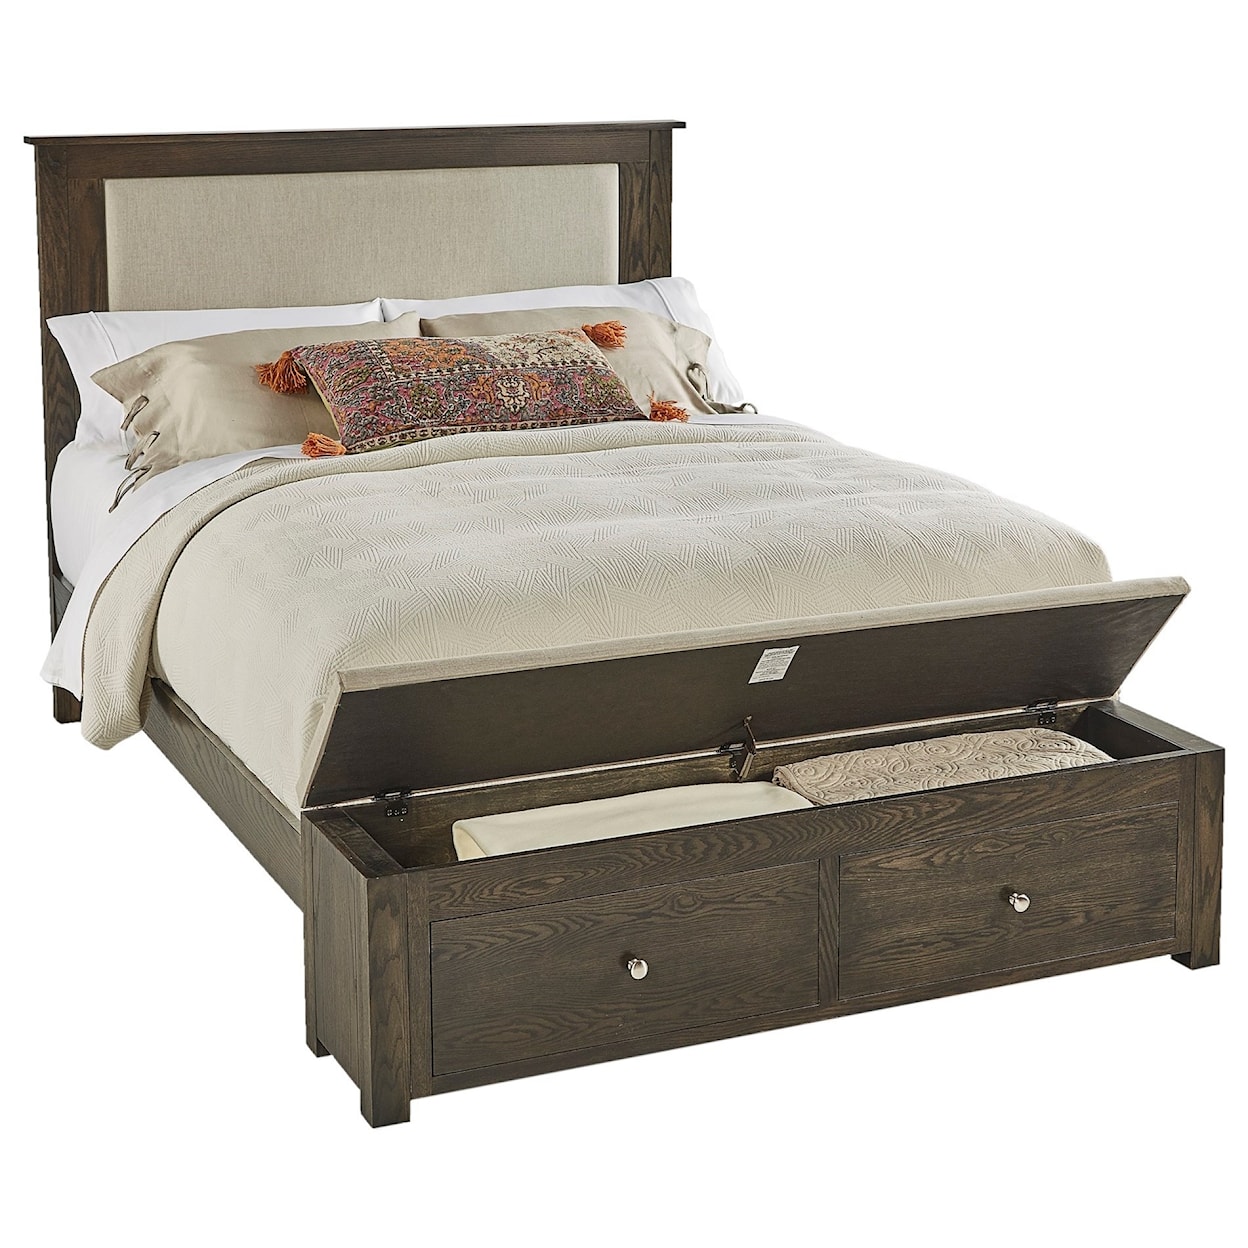 Daniel's Amish Concord  Cal King Single Panel Fabric Storage Bed